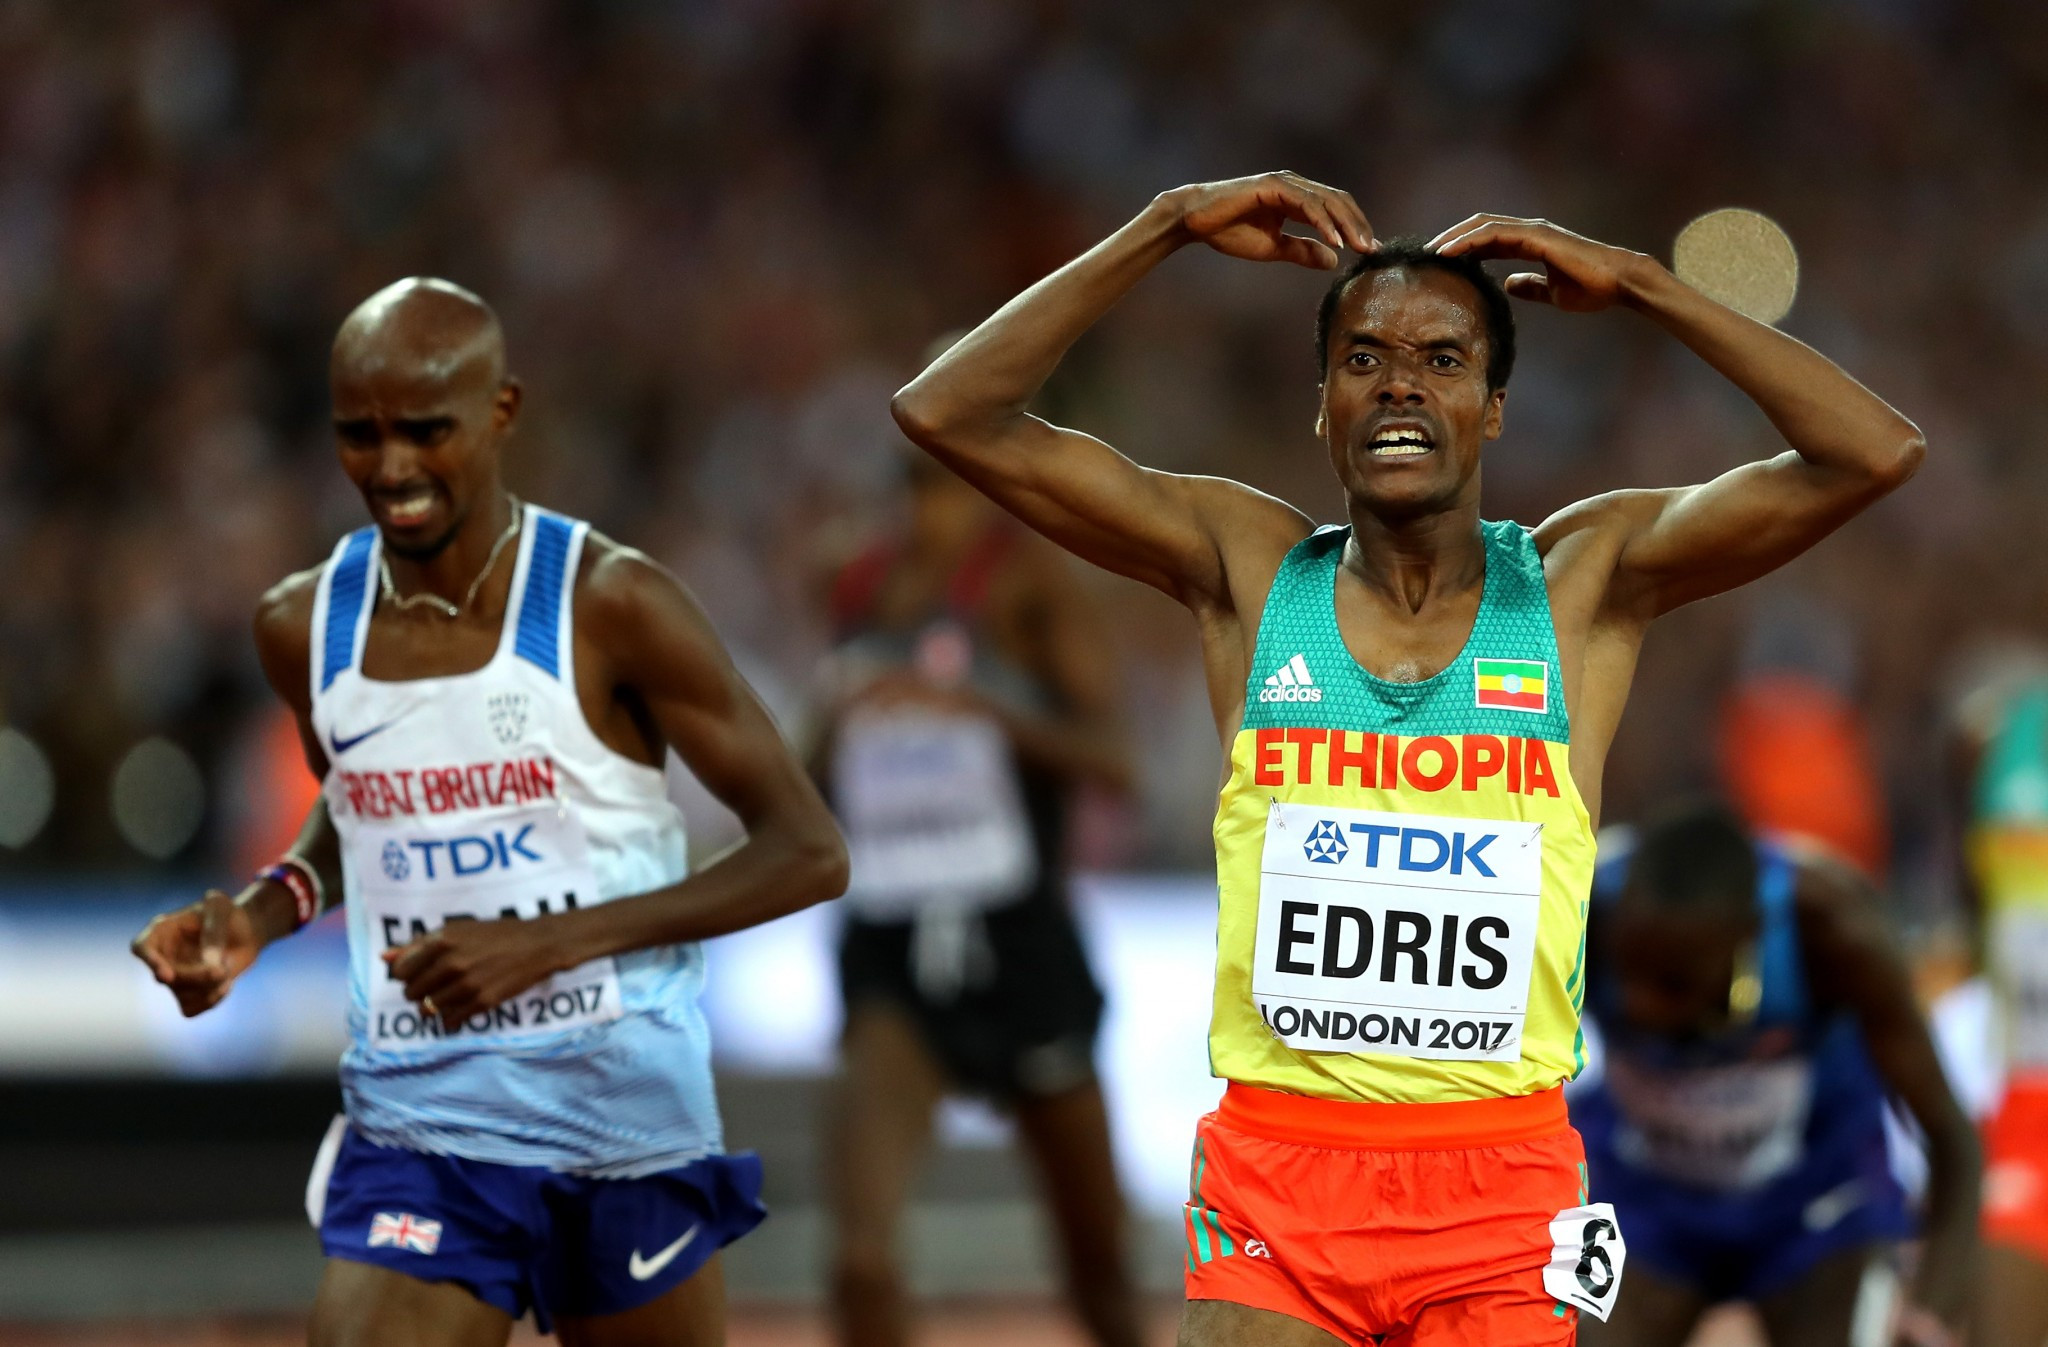 Muktar Edris spoiled Sir Mo's final event by winning the 5,000m gold medal ©Getty Images